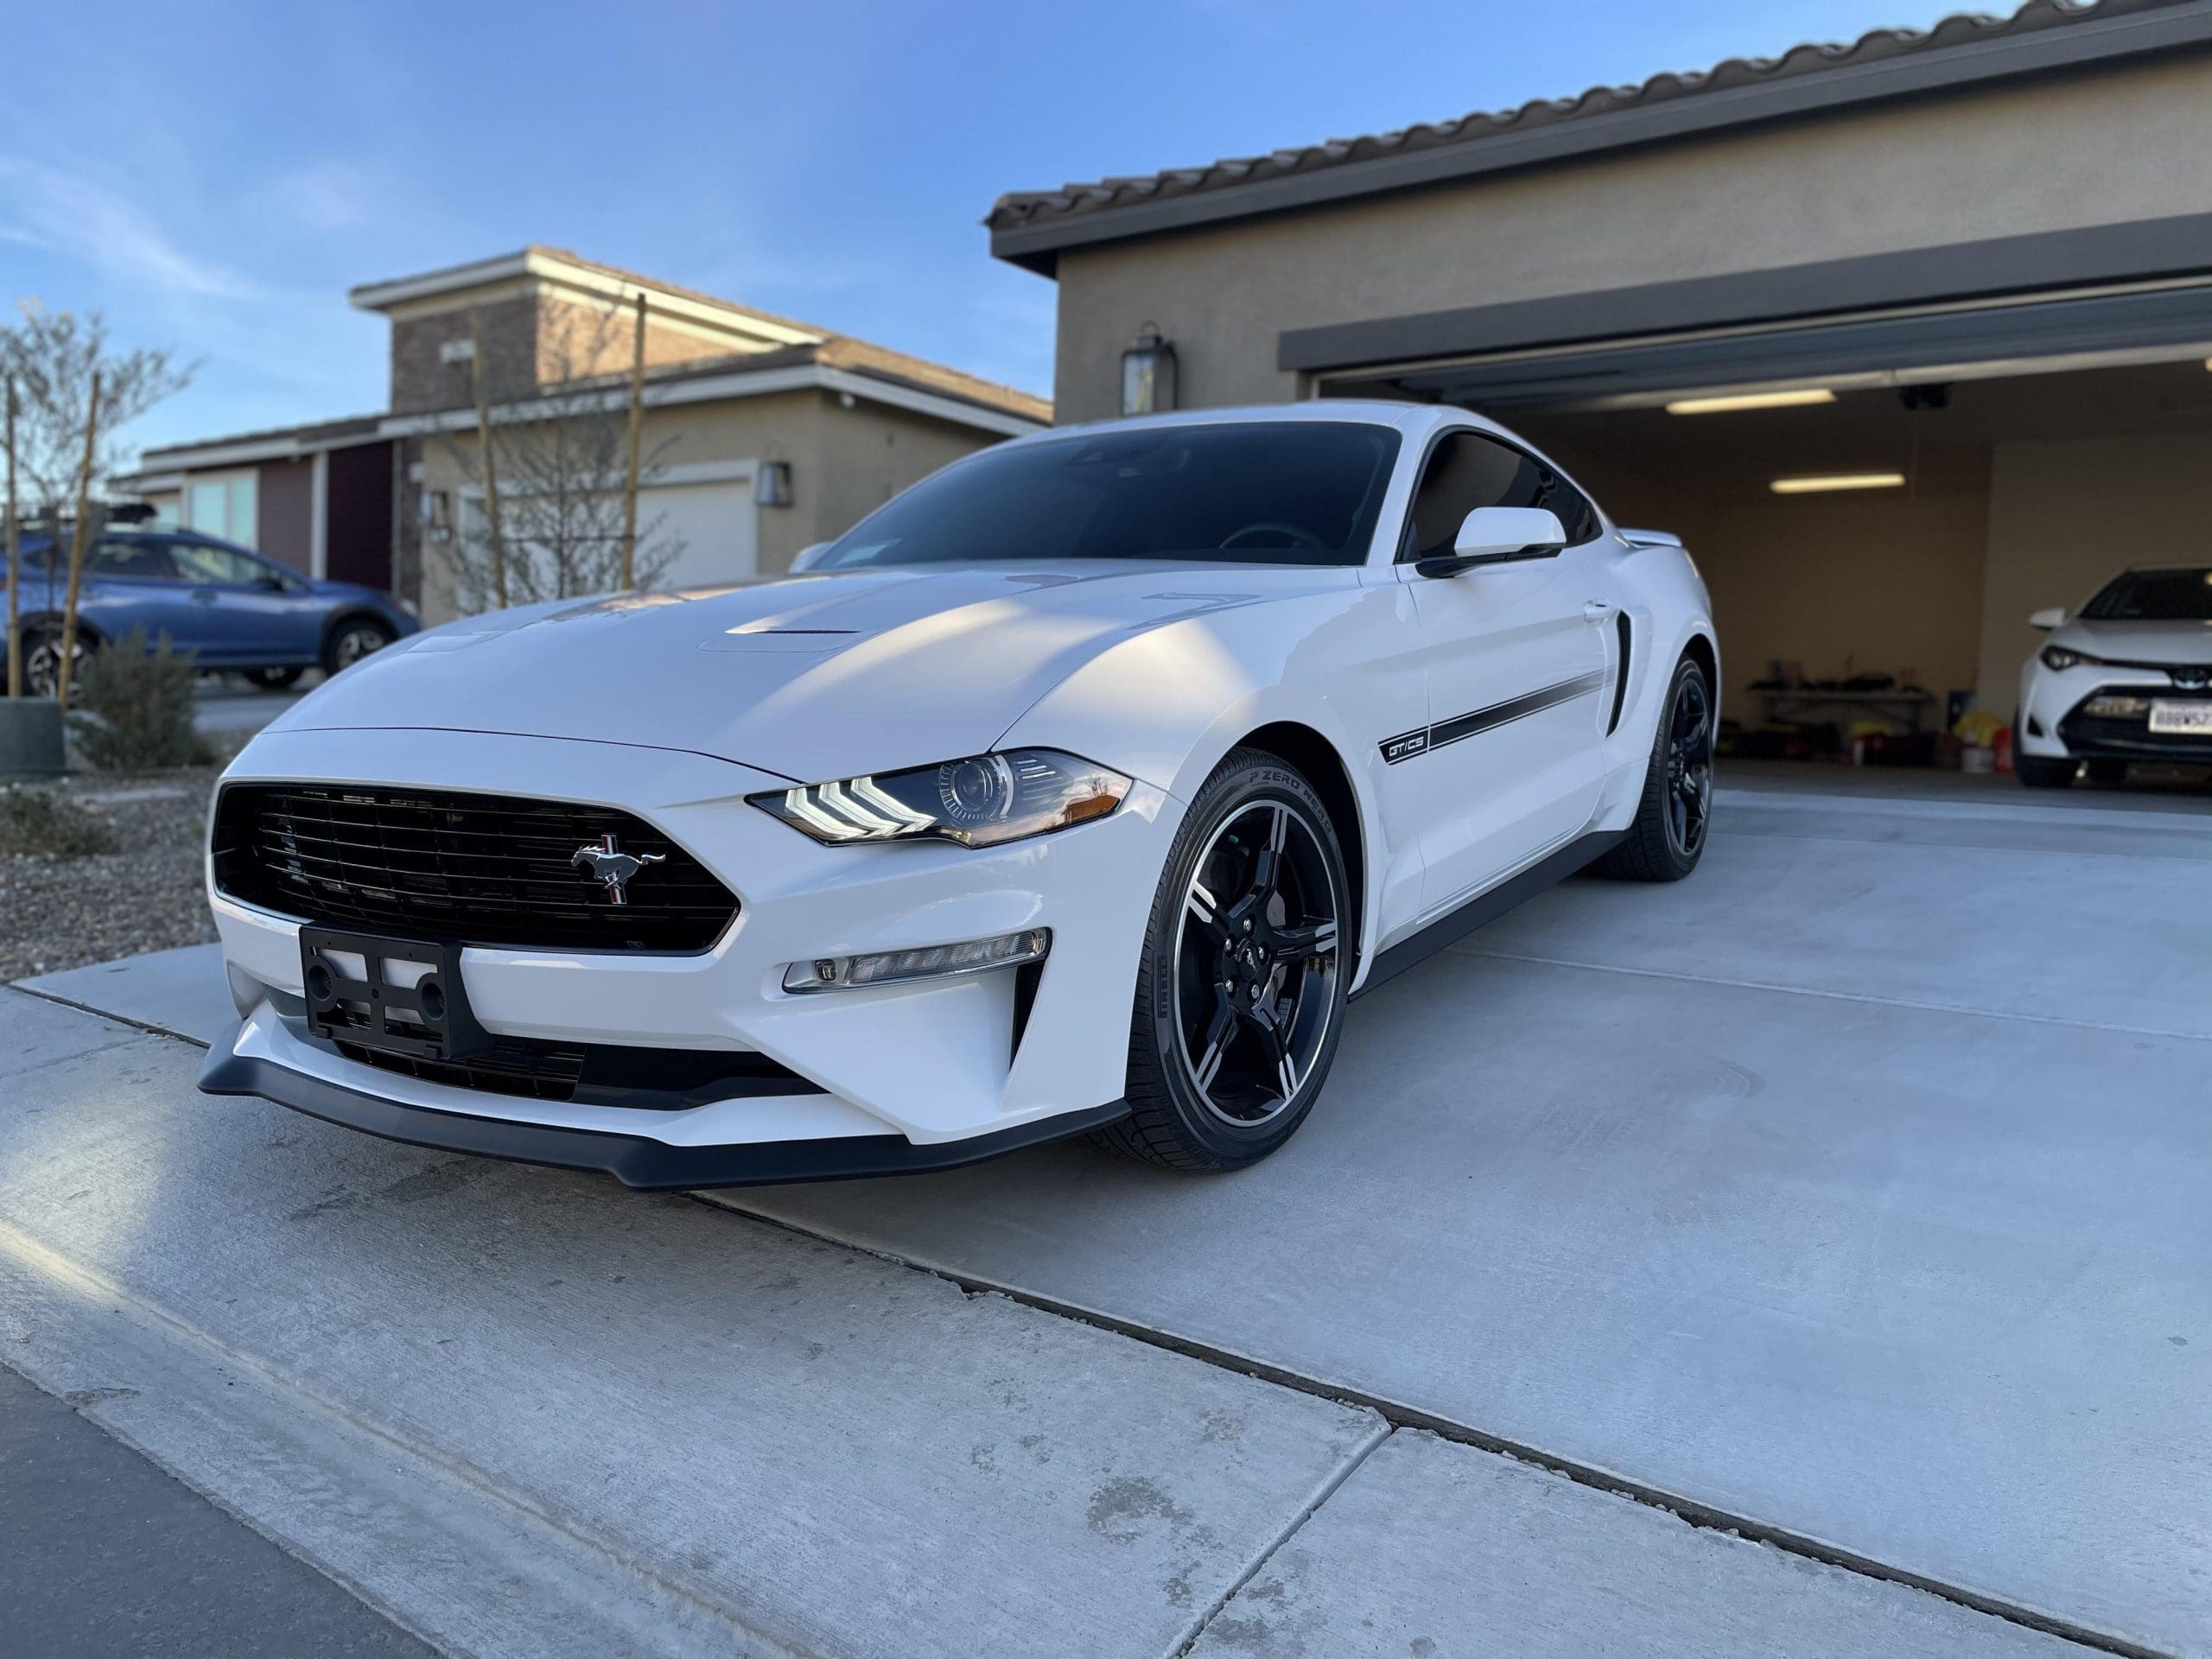 Mustang Of The Day: 2020 Ford Mustang GT/CS California Special